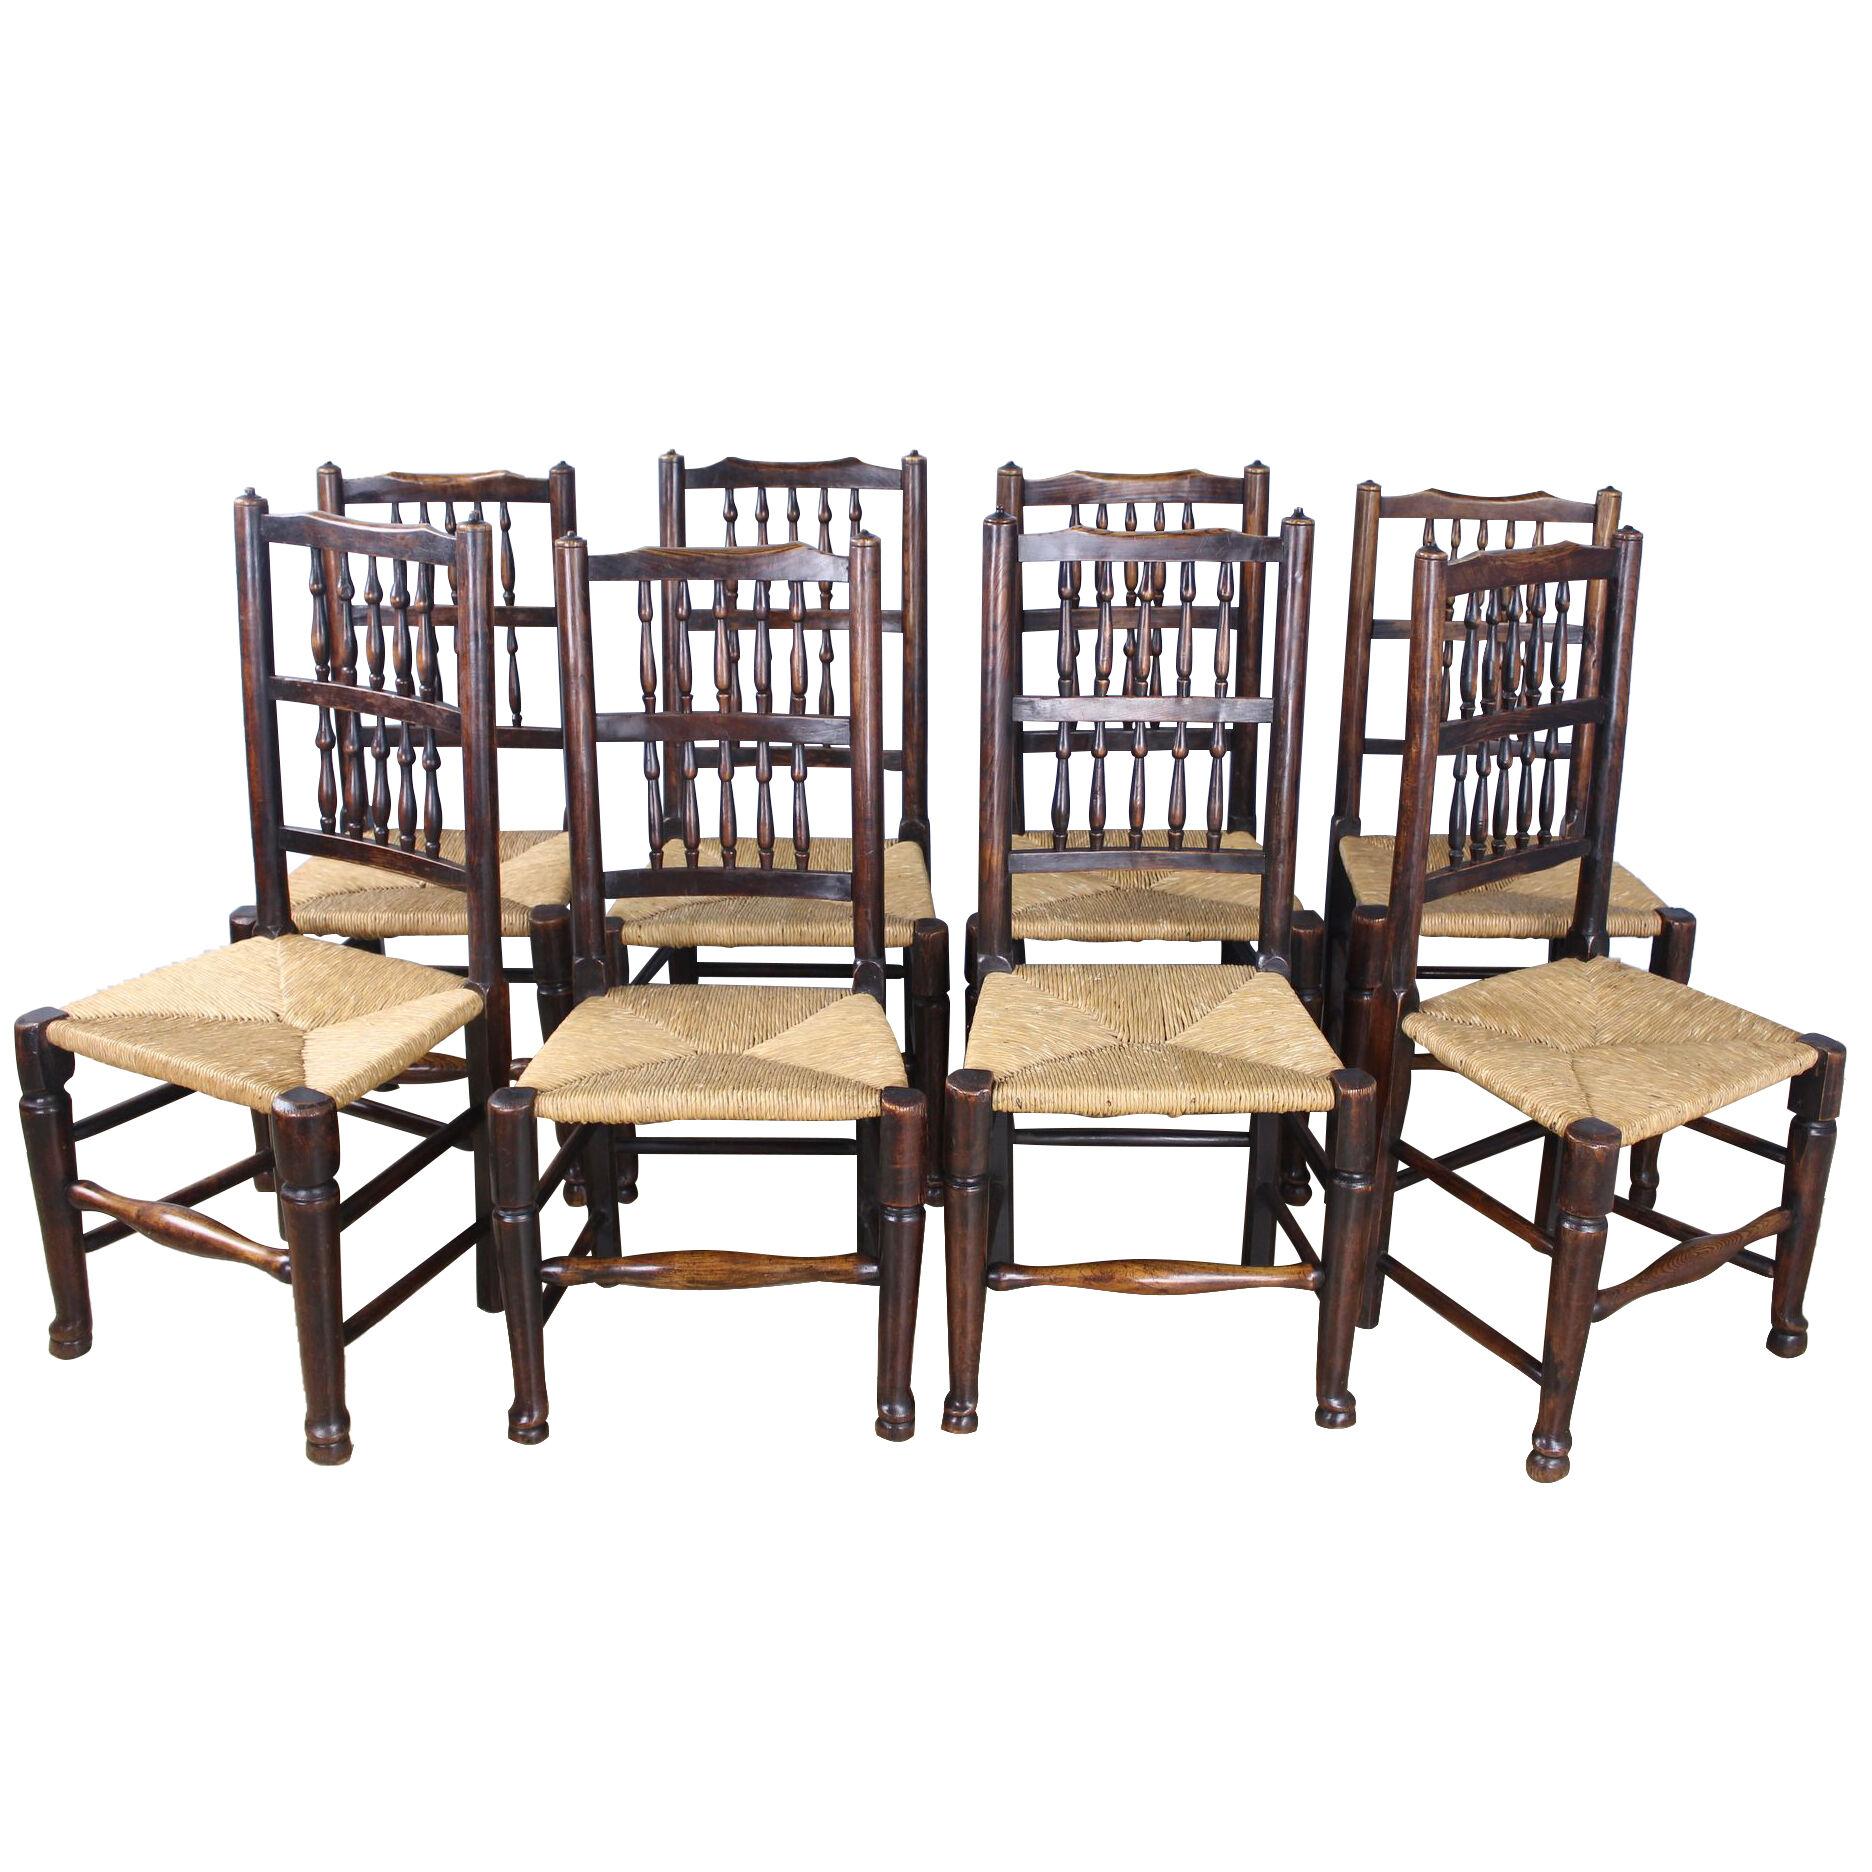 Collection of Eight Early 19th Century Ash and Elm Lancashire Spindleback Chairs